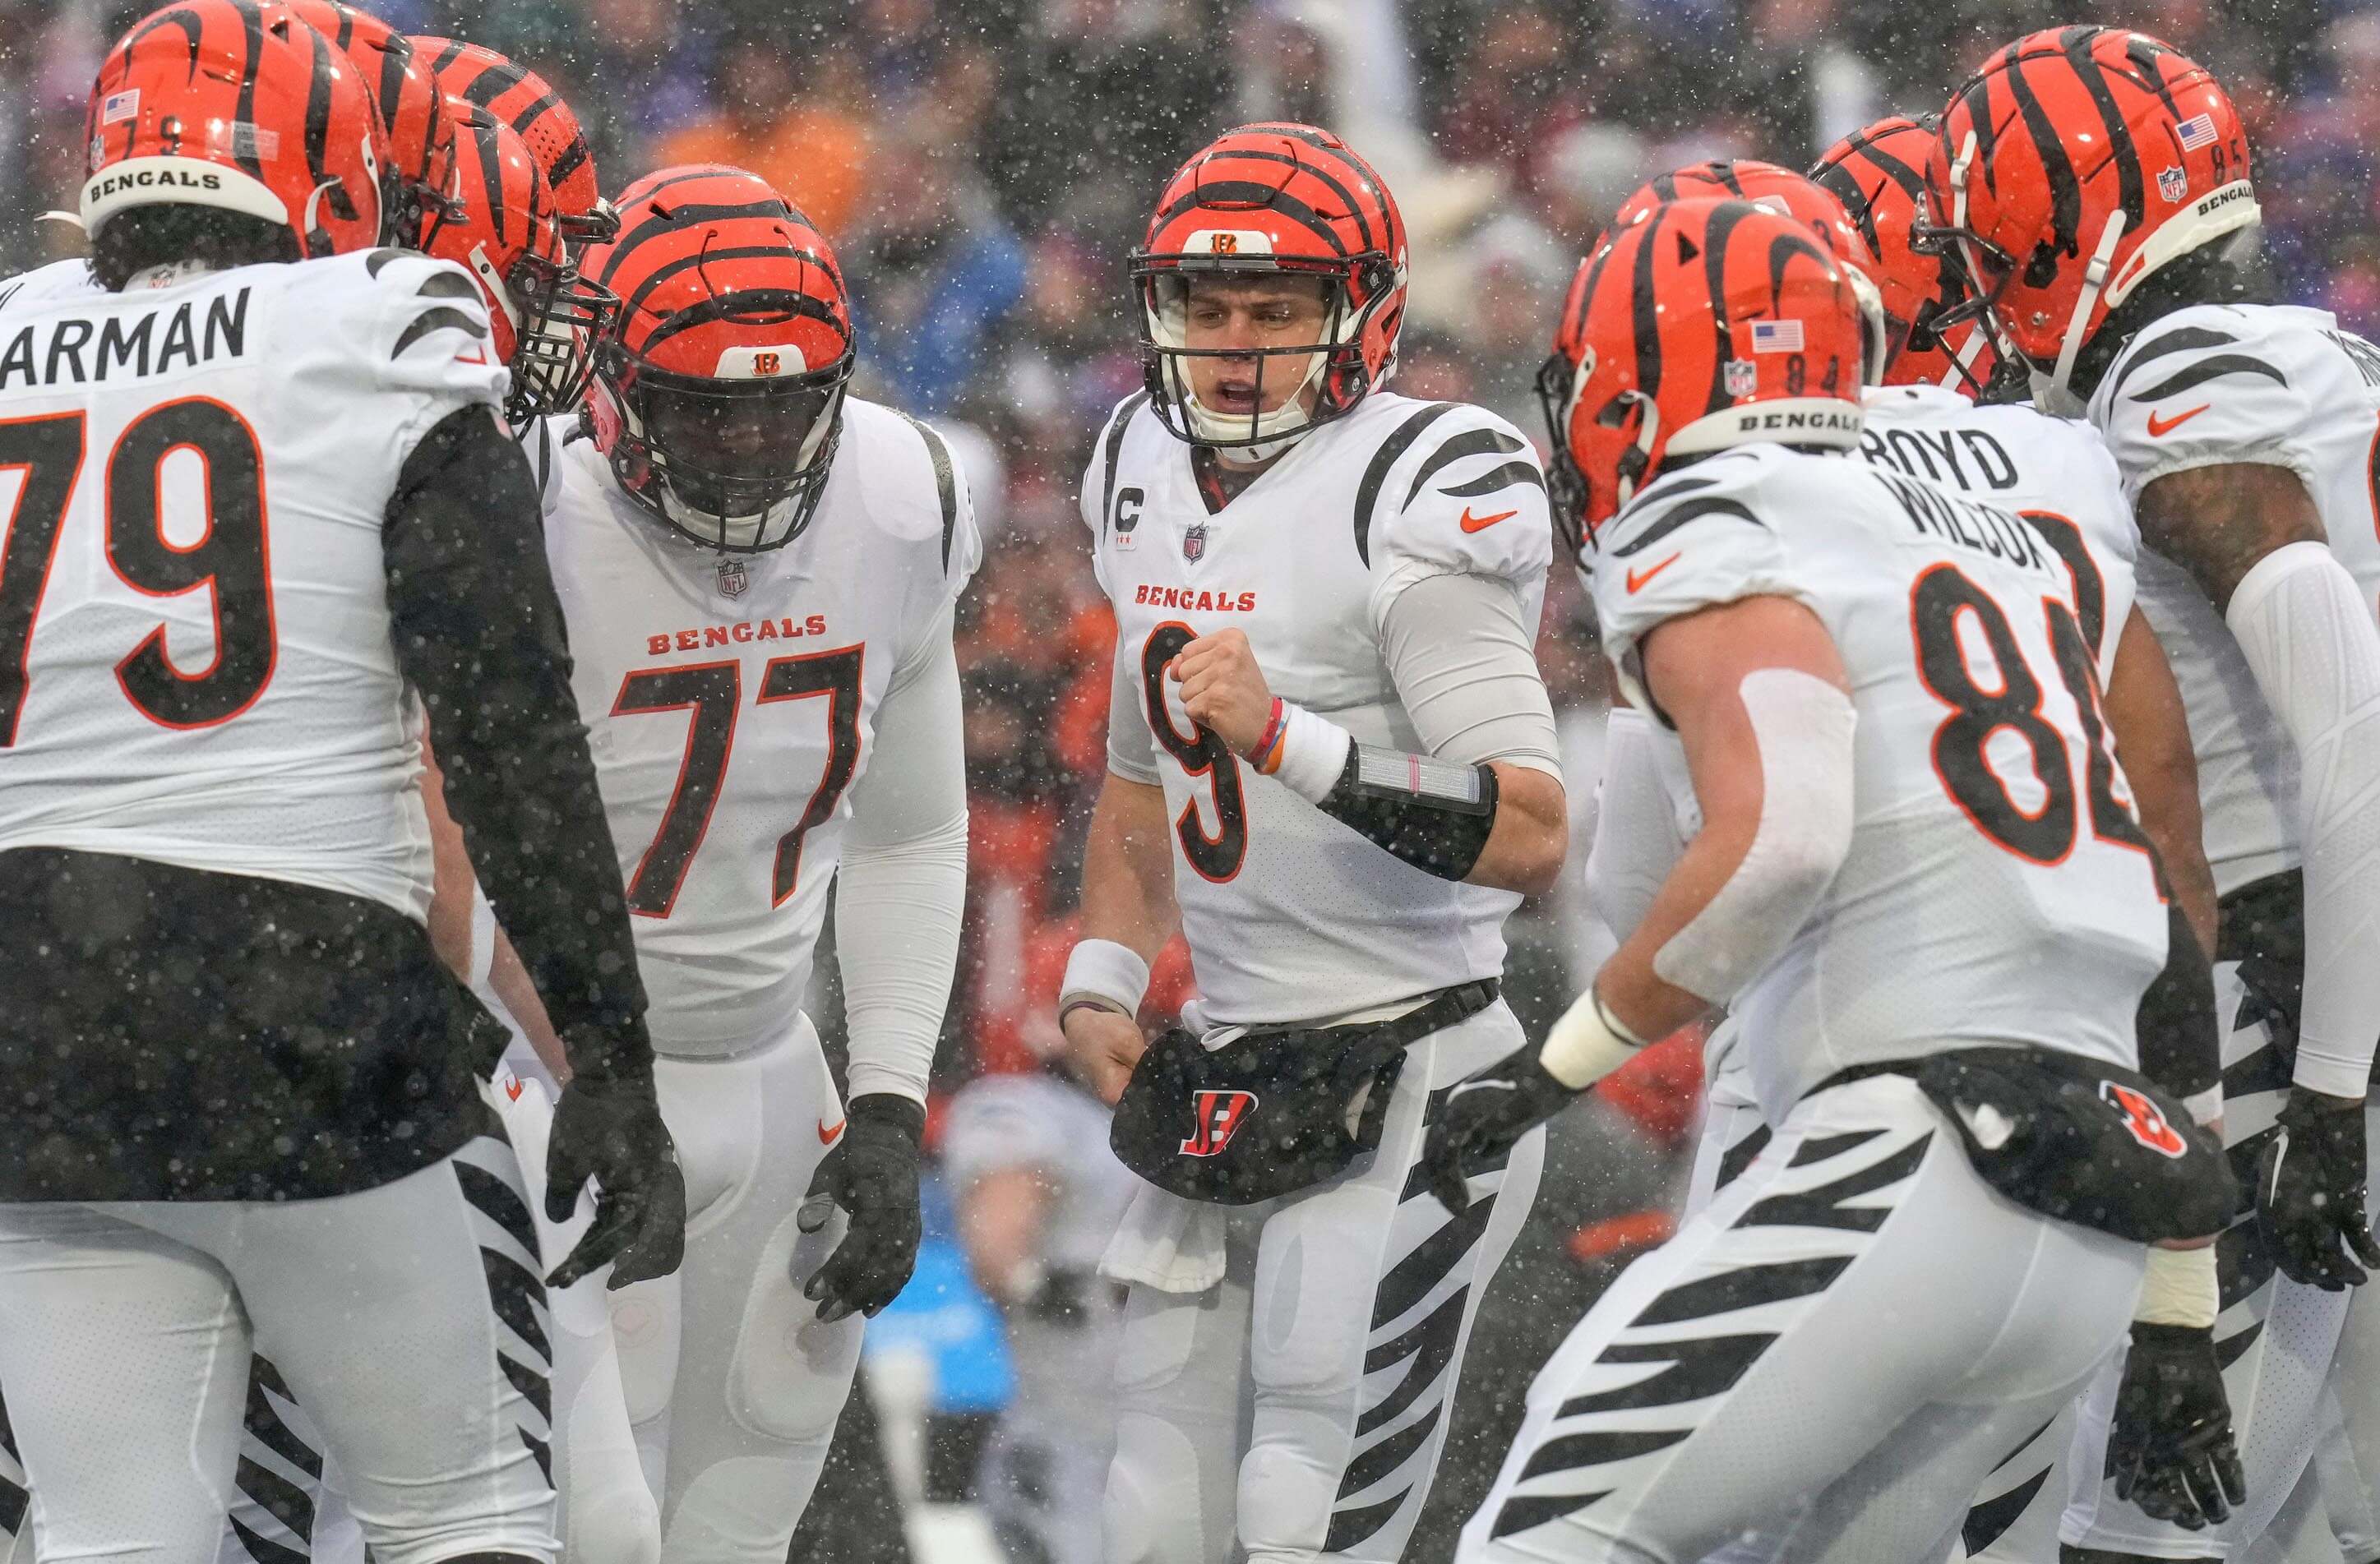 Cincinnati Bengals quarterback Joe Burrow (9) calls a play in the first quarter of the NFL divisional playoff football game between the Cincinnati Bengals and the Buffalo Bills, Sunday, Jan. 22, 2023, at Highmark Stadium in Orchard Park, N.Y.